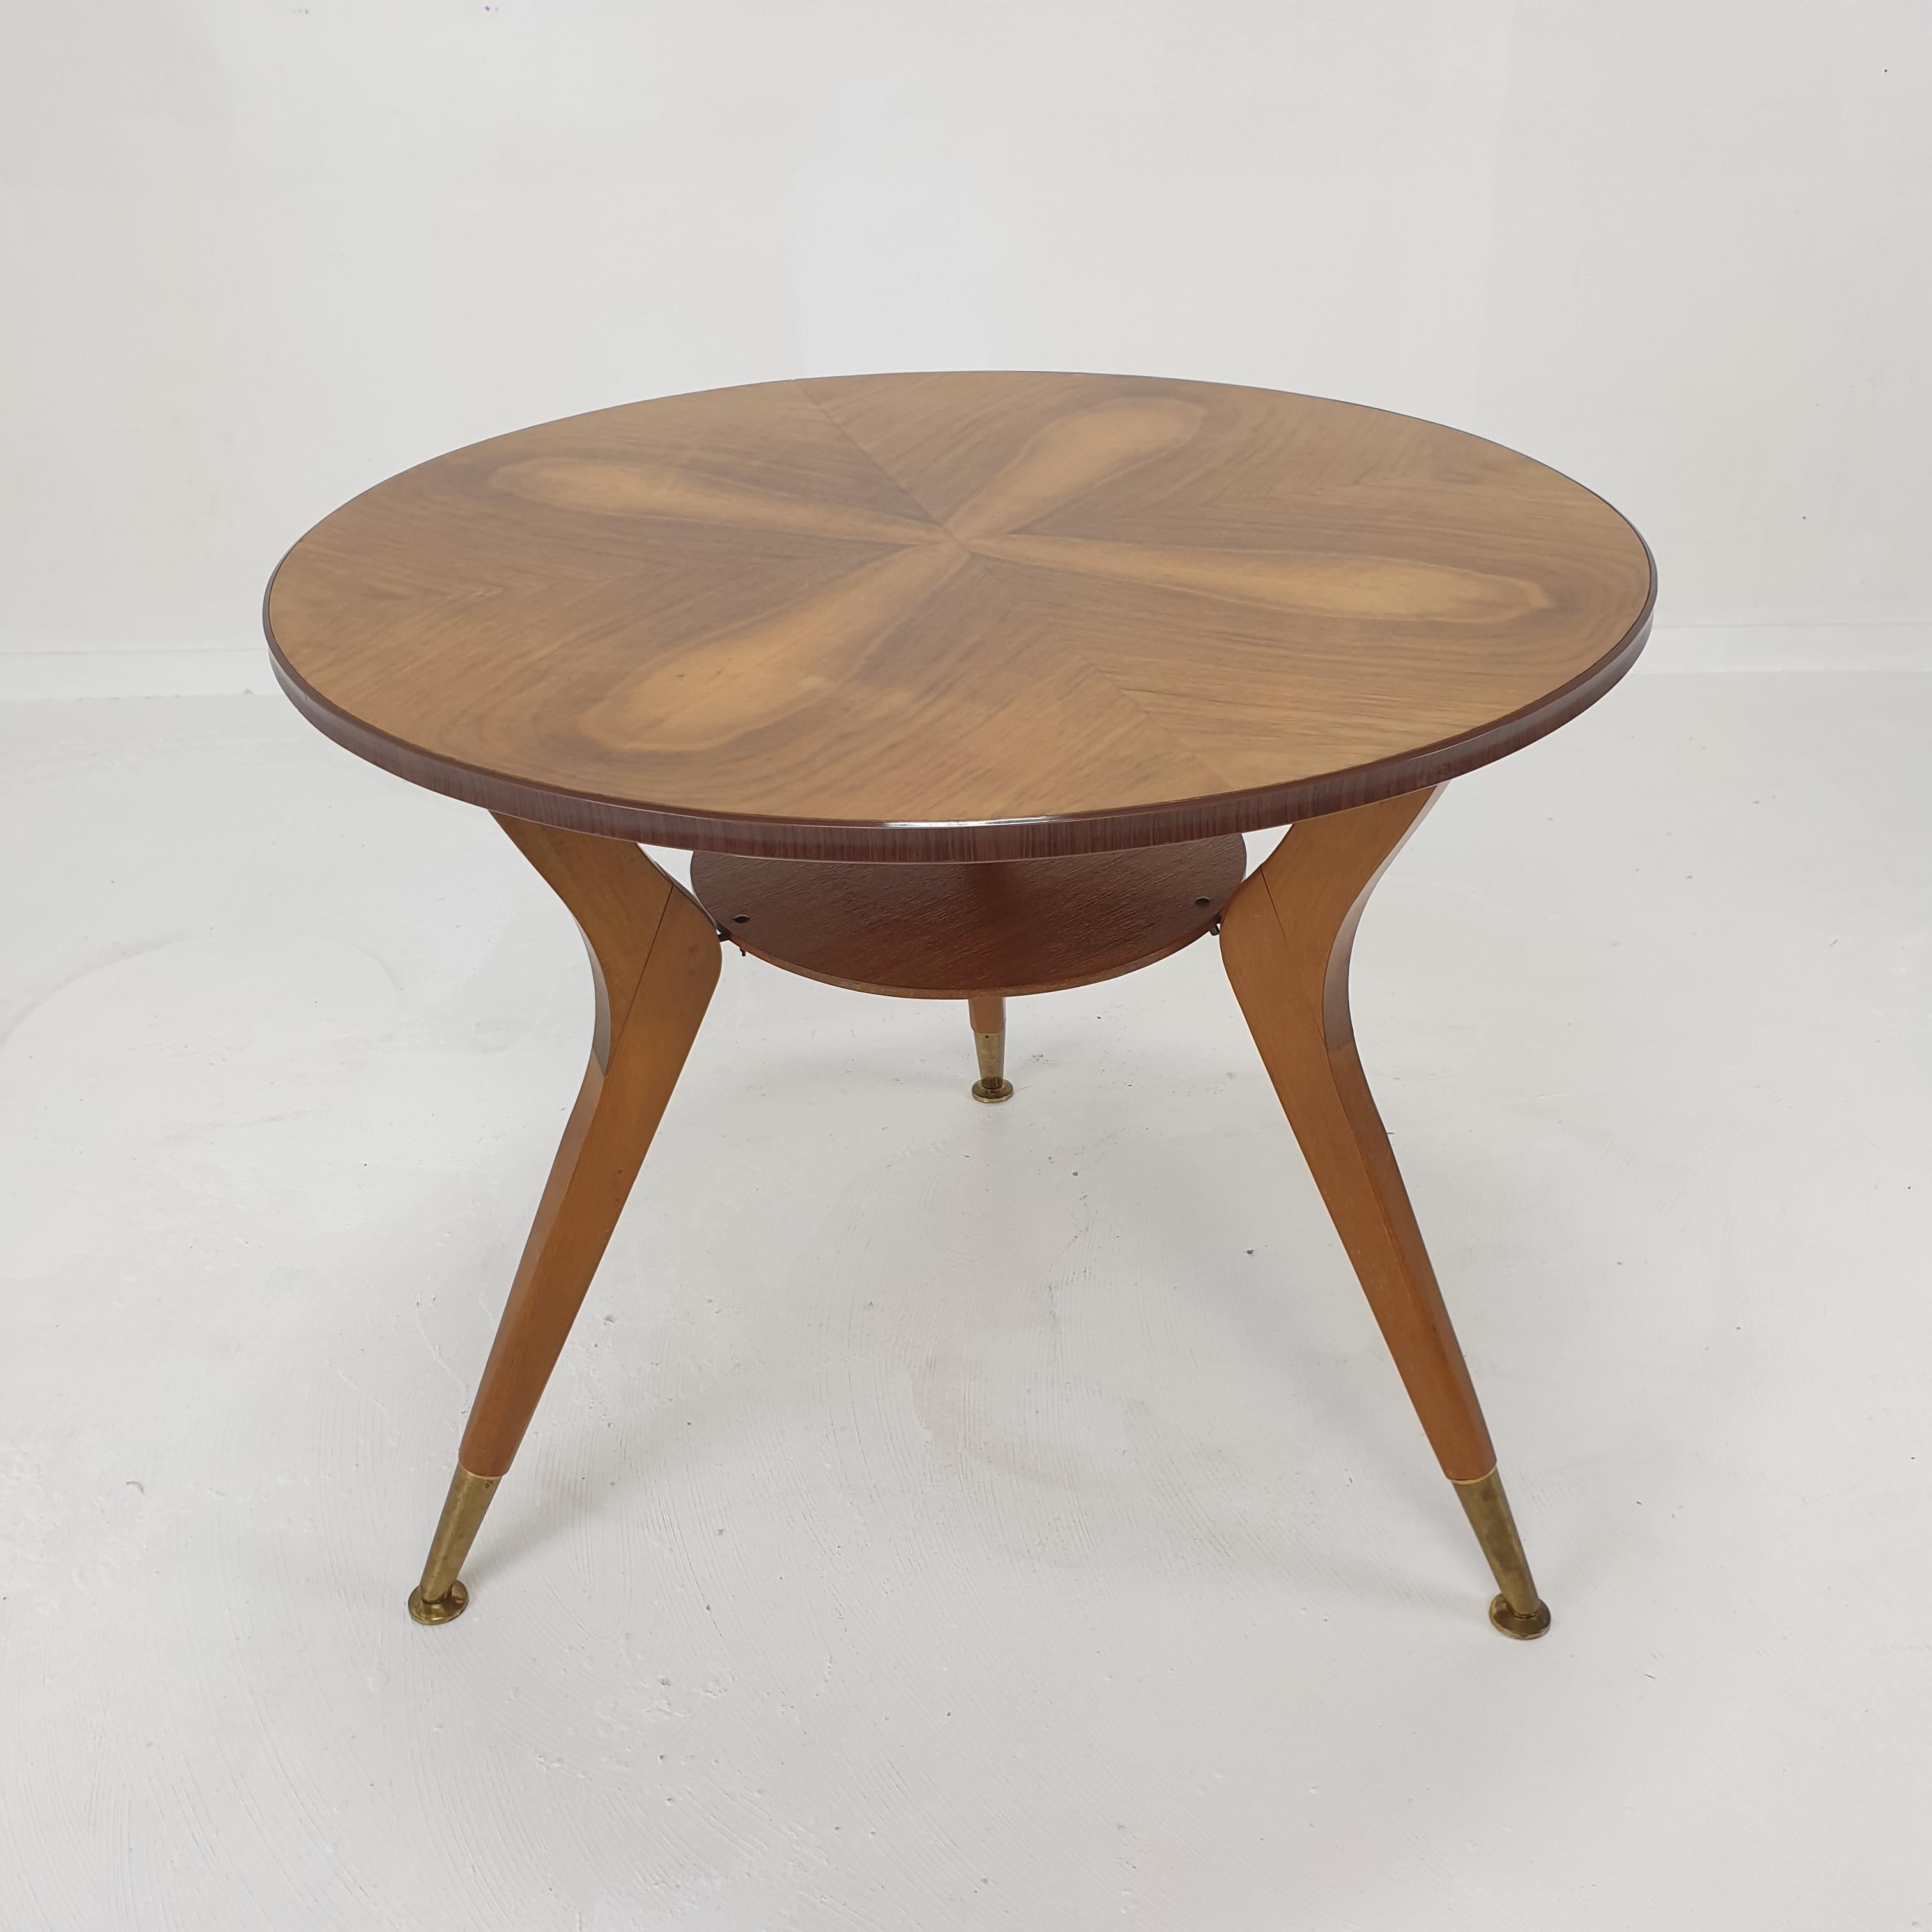 Midcentury Italian Wooden Coffee or Side Table with Brass Feet, 1960s For Sale 1